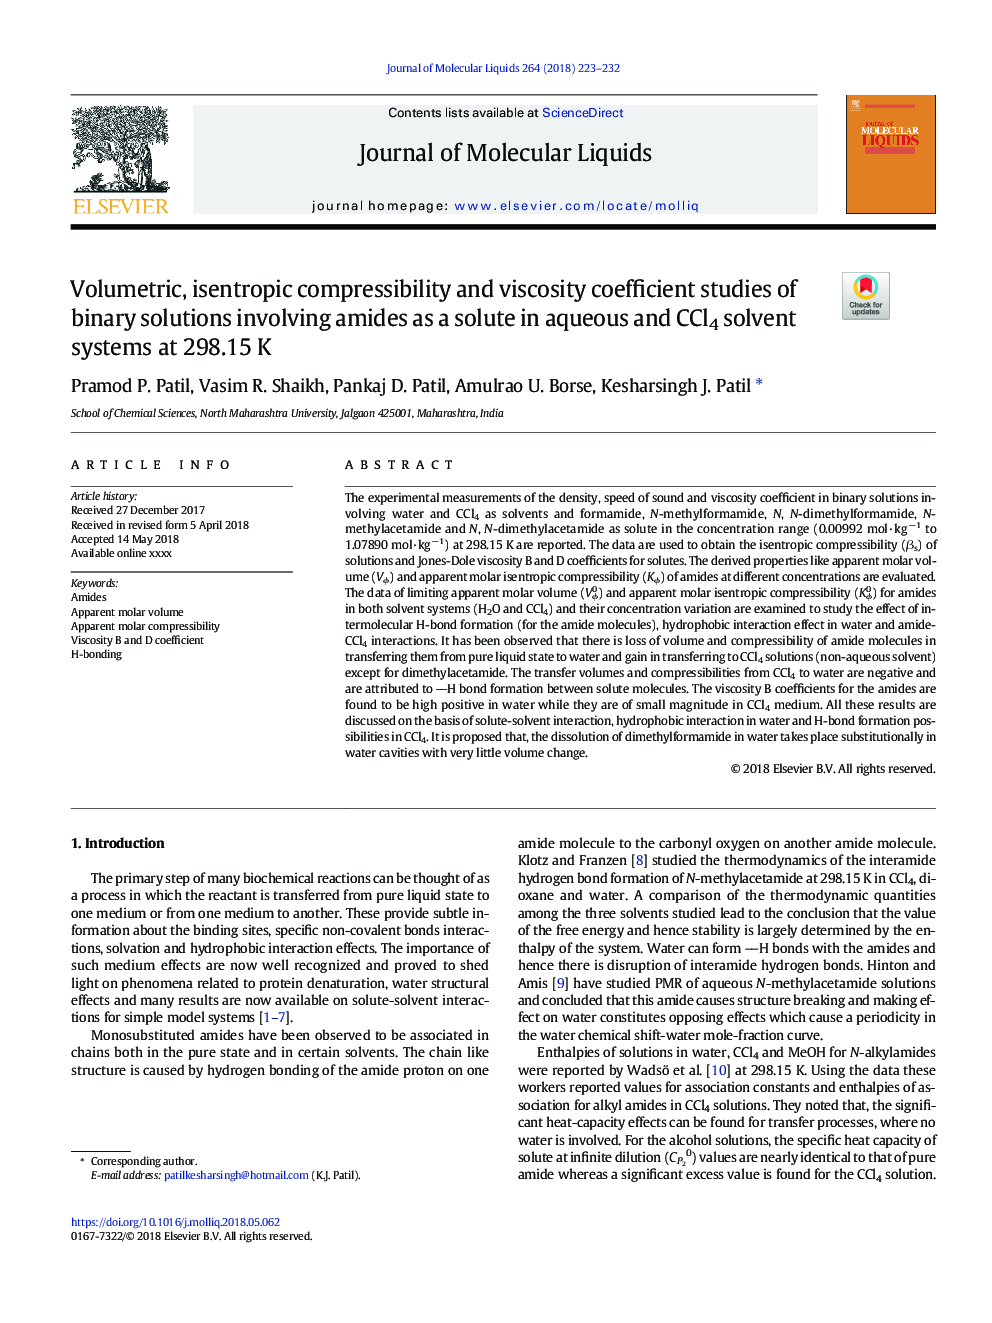 Volumetric, isentropic compressibility and viscosity coefficient studies of binary solutions involving amides as a solute in aqueous and CCl4 solvent systems at 298.15â¯K